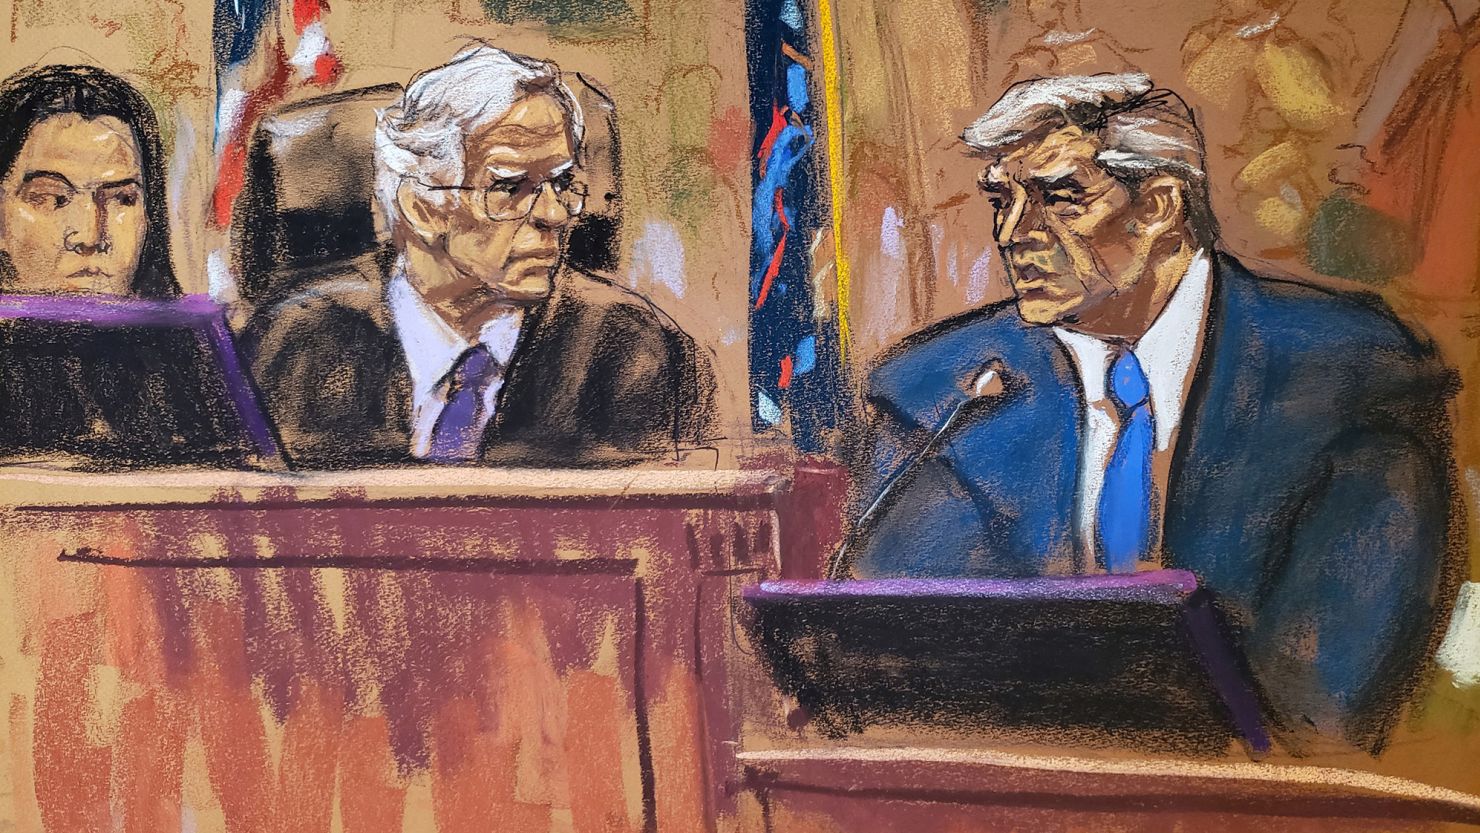 Former U.S. President Donald Trump is questioned by Judge Arthur F. Engoron before being fined $10,000 for violating a gag order for a second time, during the Trump Organization civil fraud trial in New York State Supreme Court in the Manhattan borough of New York City, U.S., October 25, 2023 in this courtroom sketch. REUTERS/Jane Rosenberg